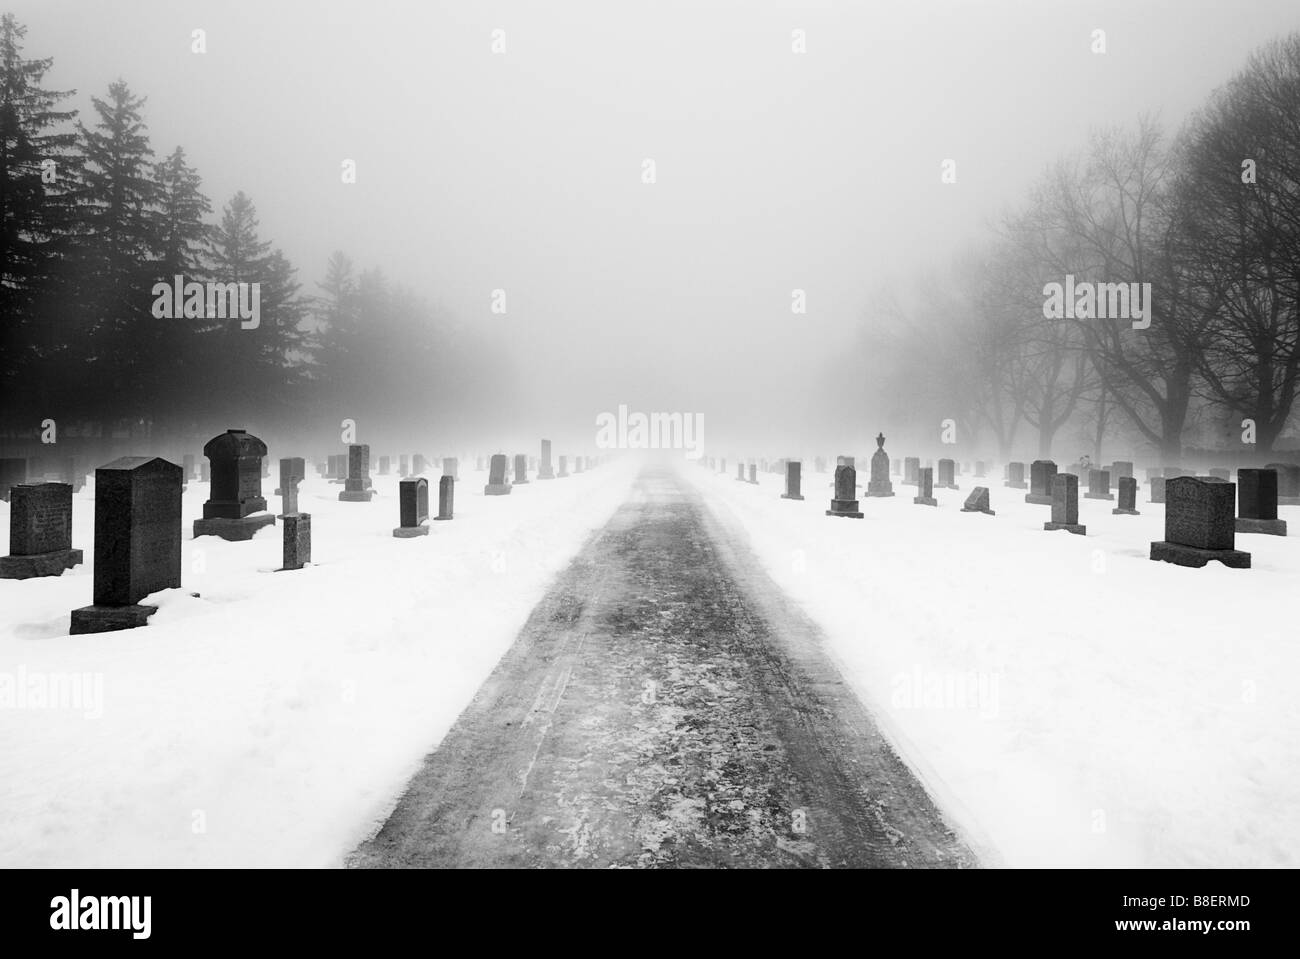 A road that recedes into the distance through the middle of a cemetery with headstones on either side on a foggy winter day. Stock Photo